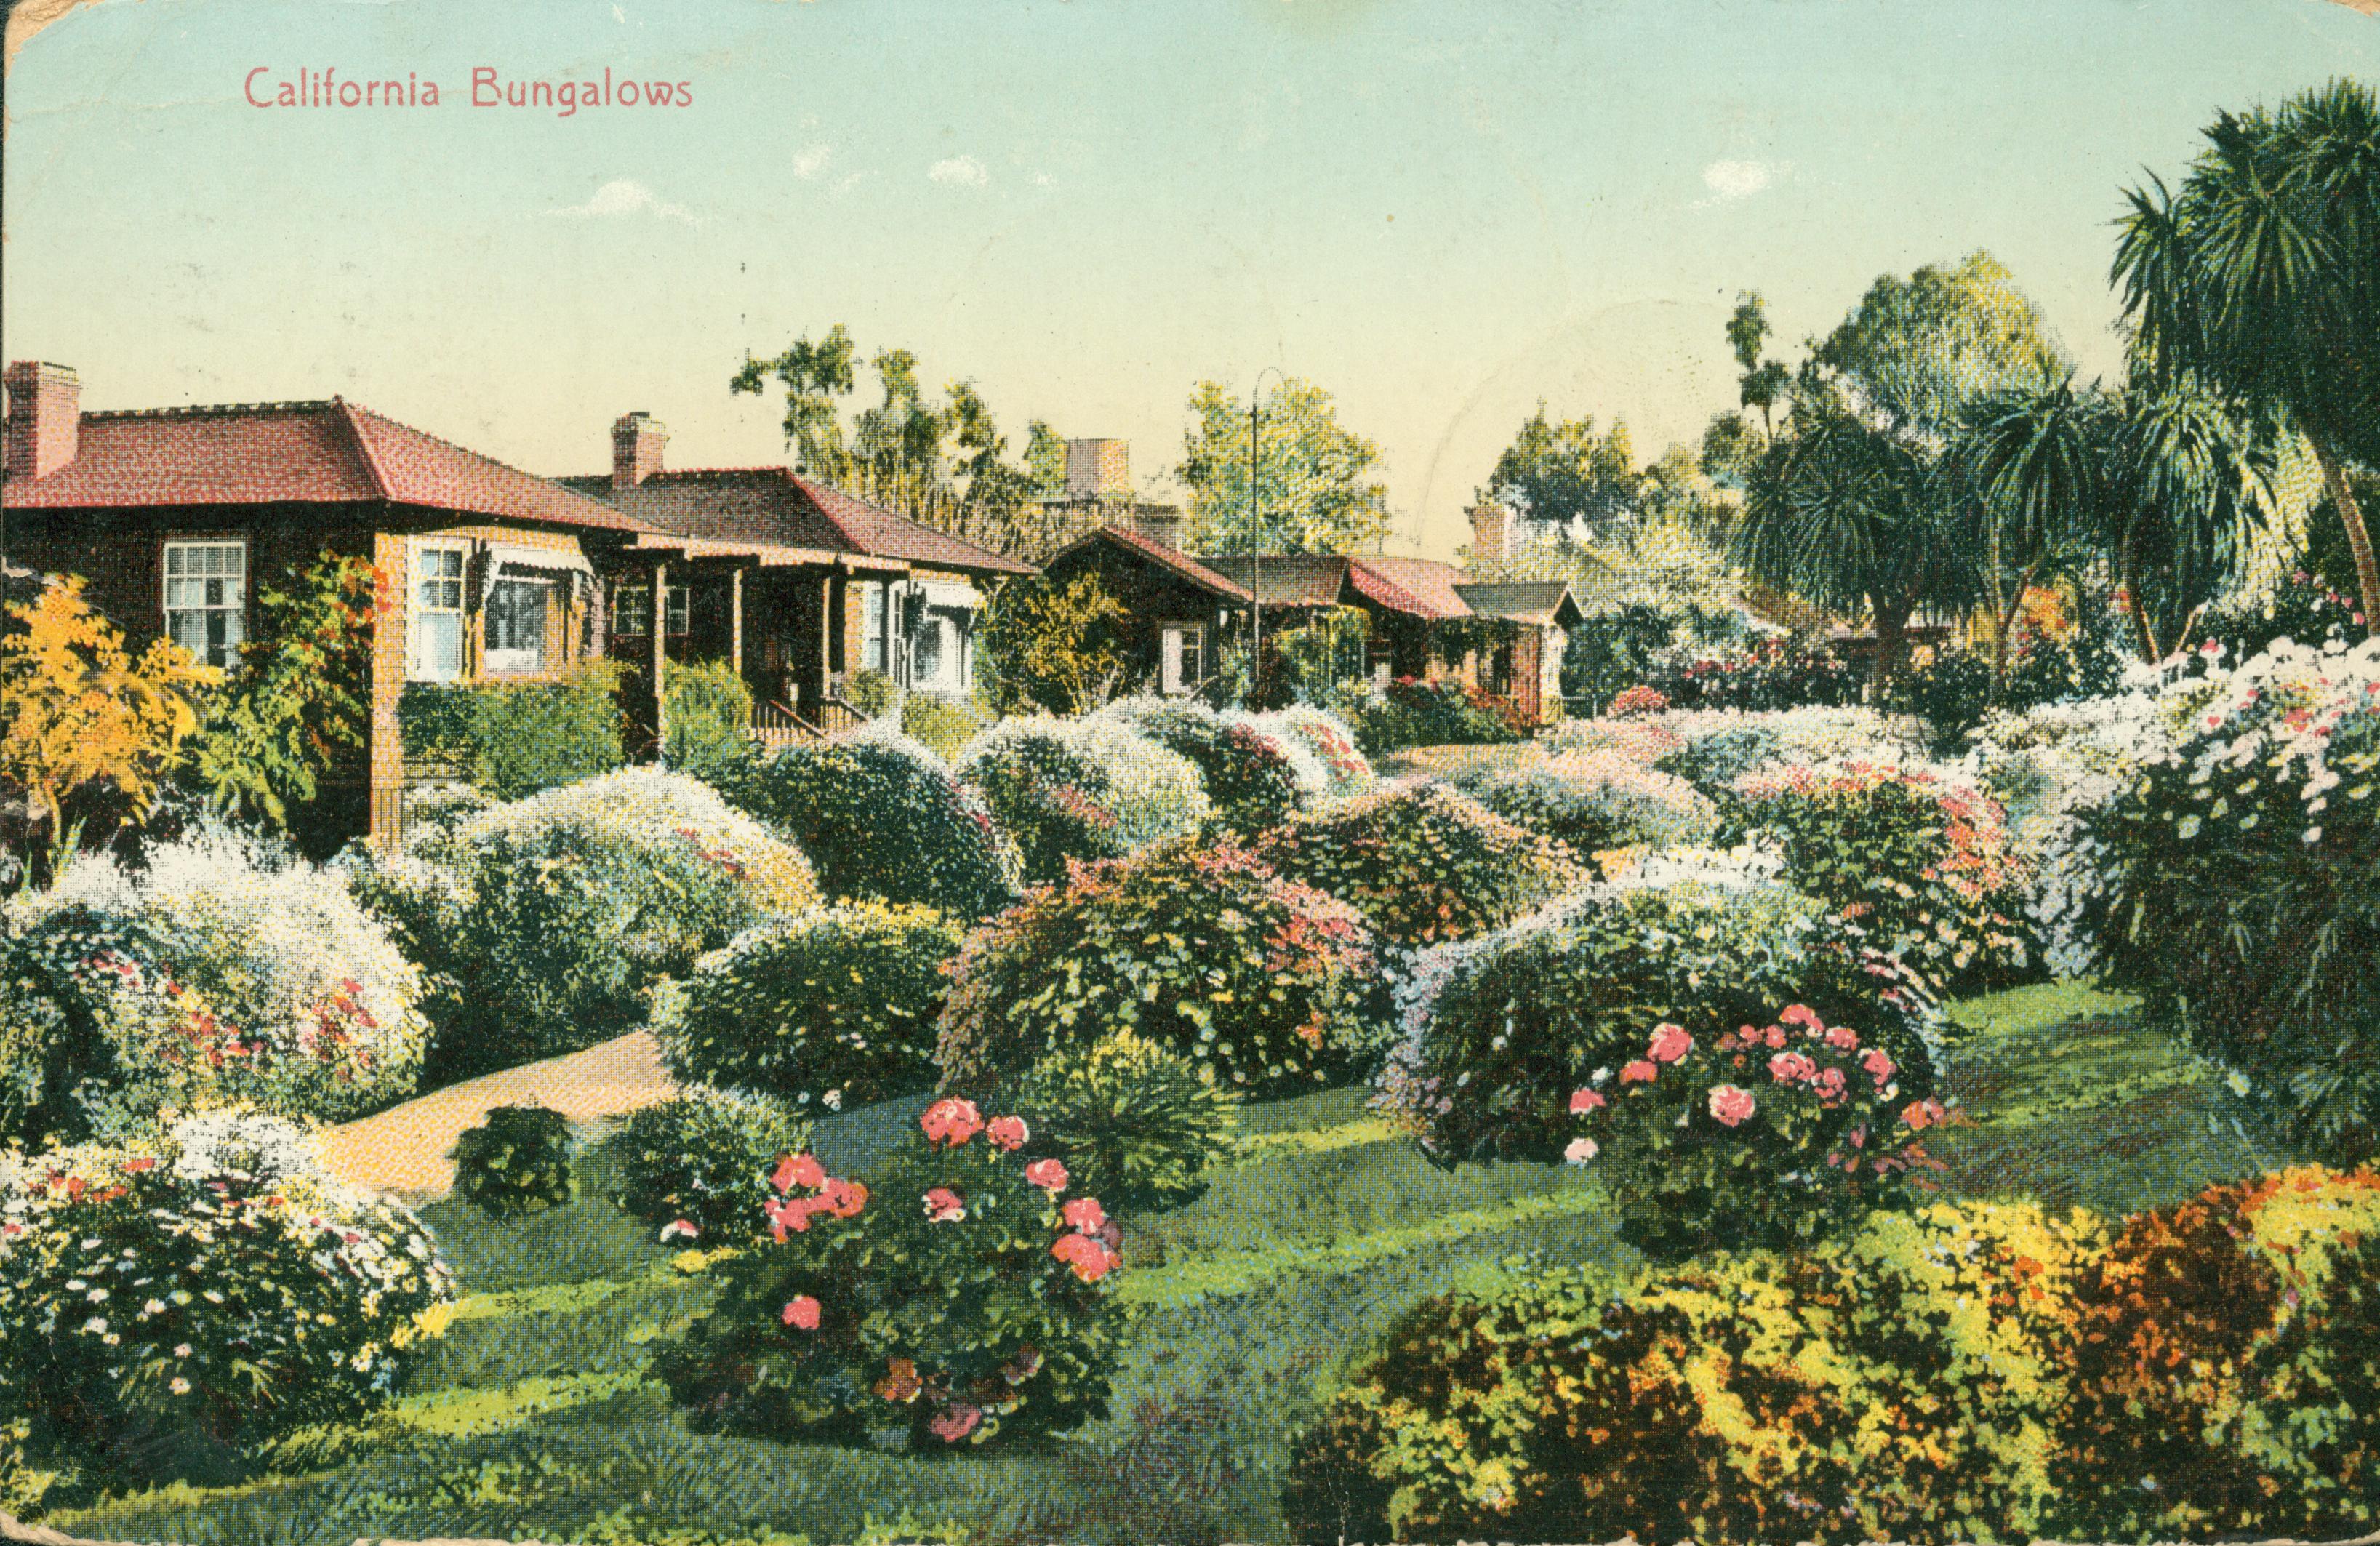 California bungalows surrounded by flowering shrubs and bushes and in the background, large trees